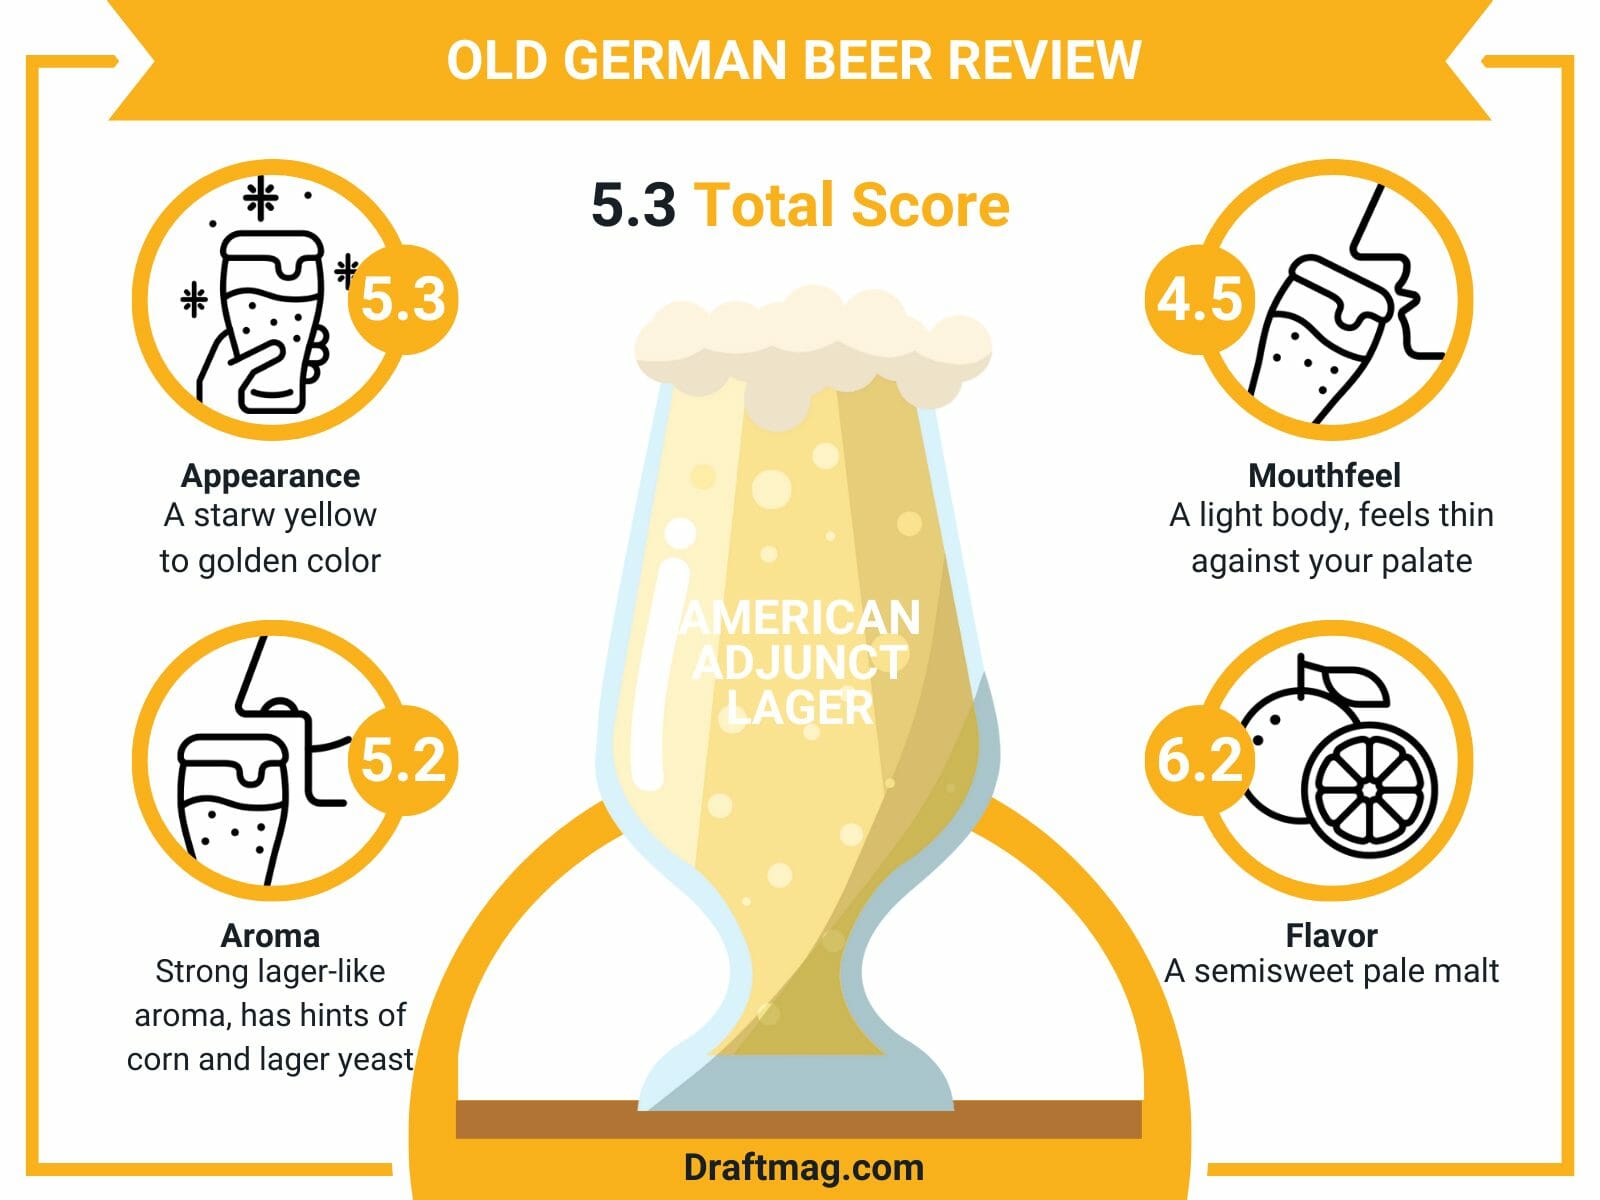 Old german beer review infographic